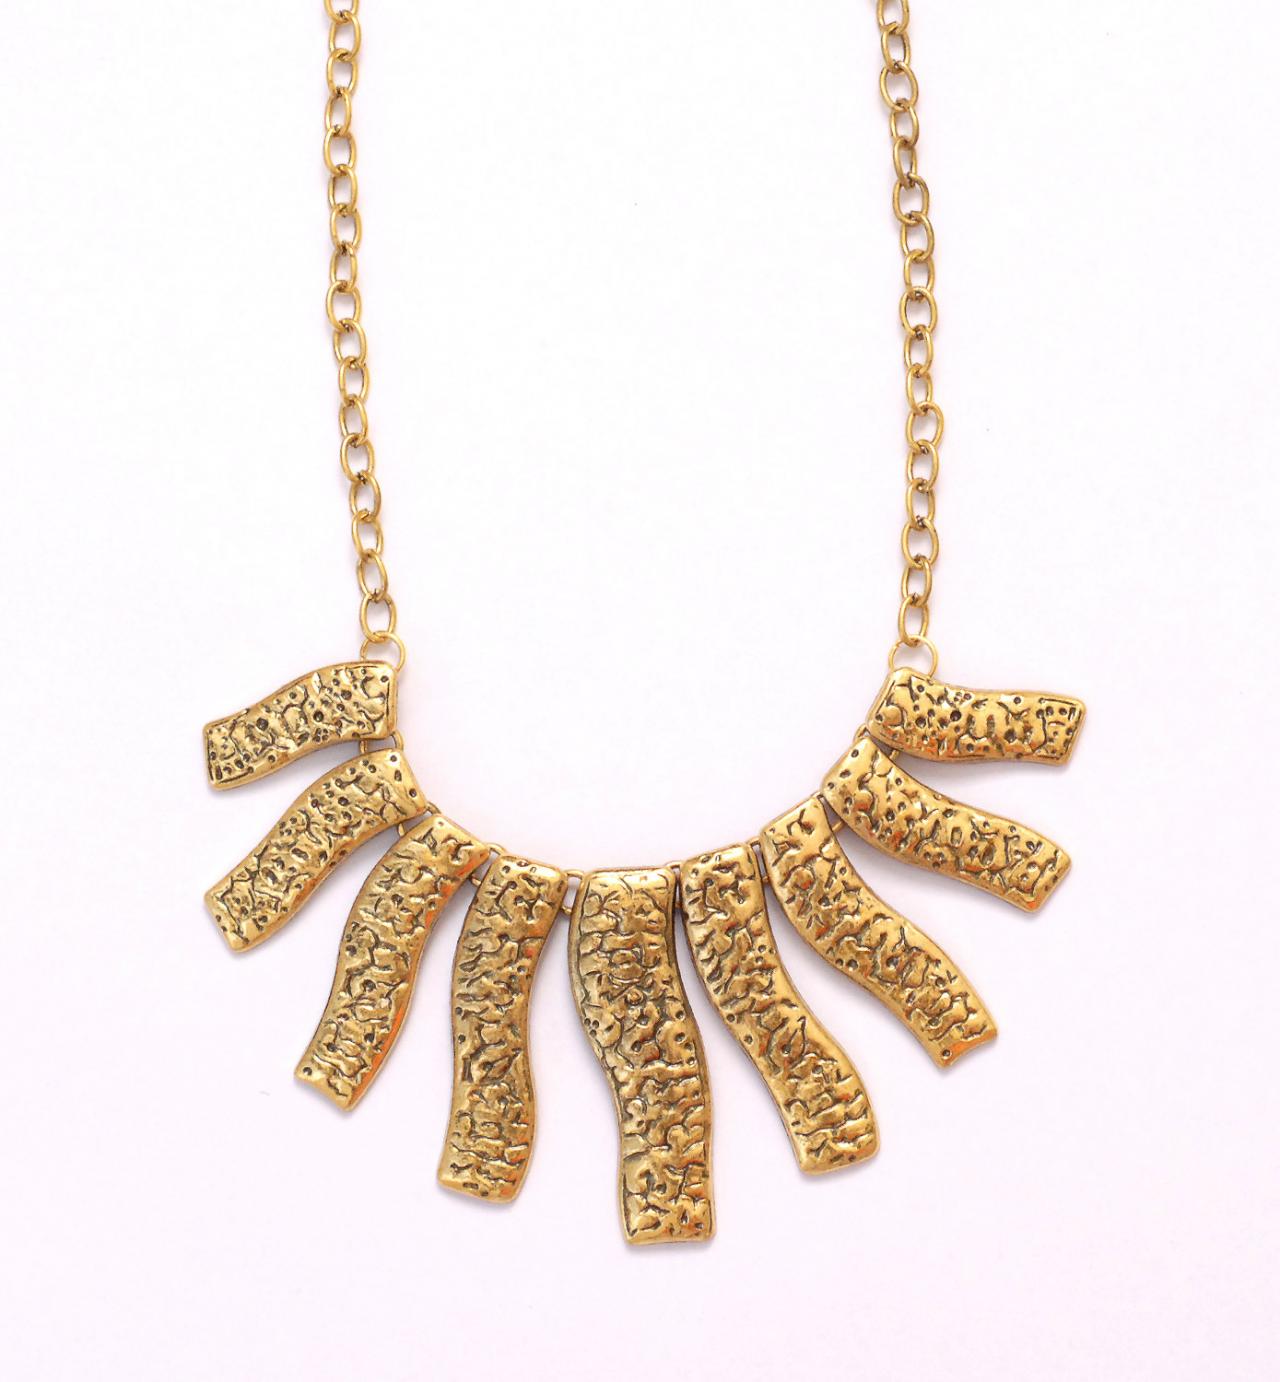 Gold Rectangle Collar Statement Necklace, Golden Bib Necklace, Chunky Necklace